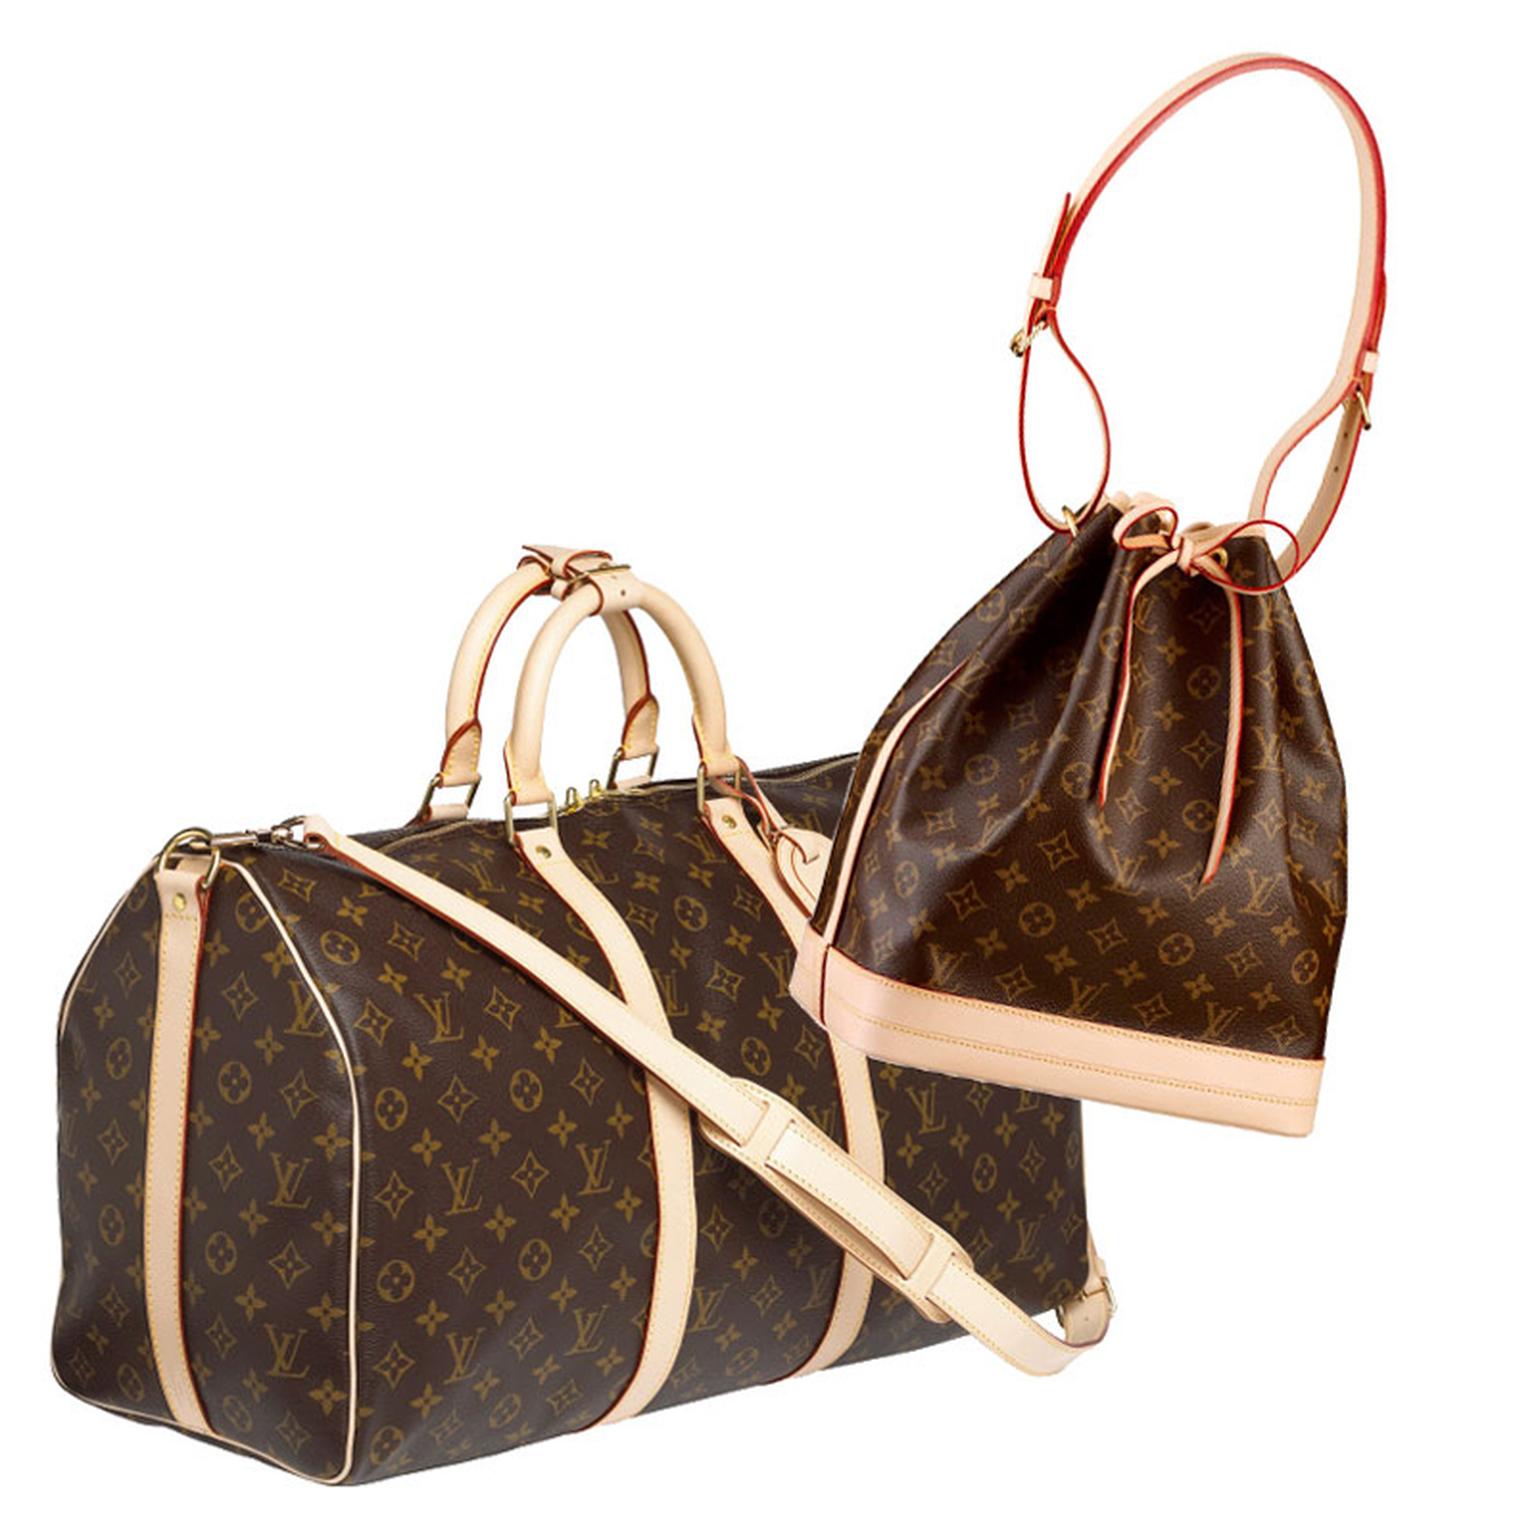 Louis Vuitton Keepall and Noe bags